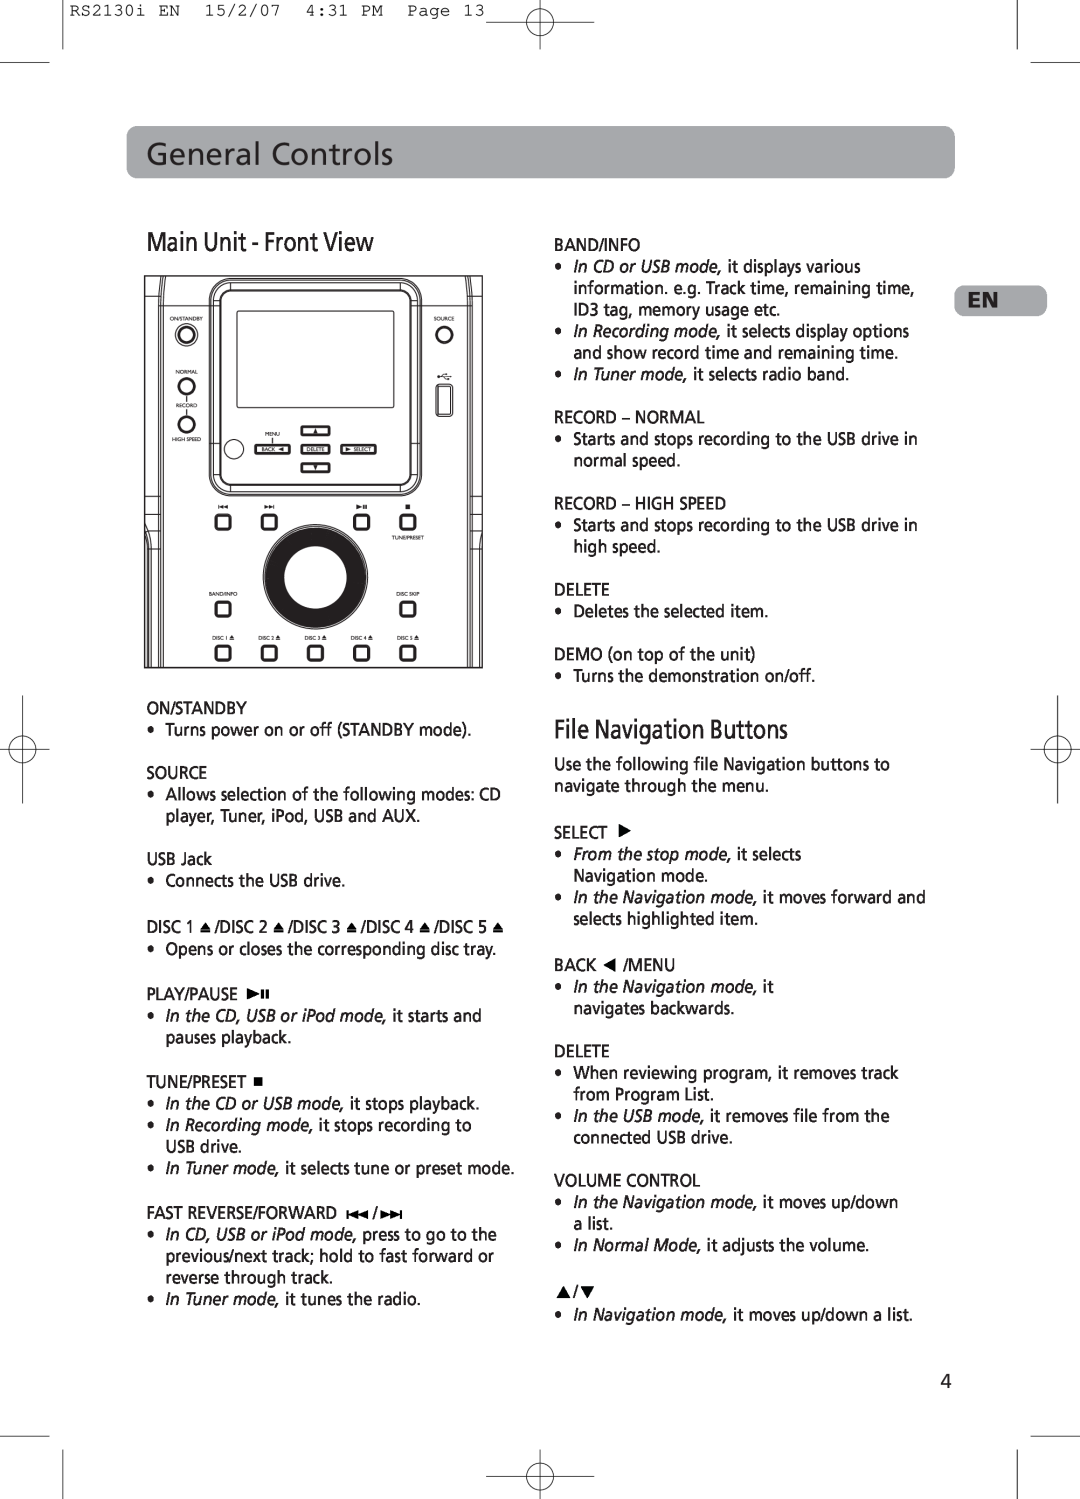 RCA RS2130i user manual General Controls, Main Unit - Front View, File Navigation Buttons 